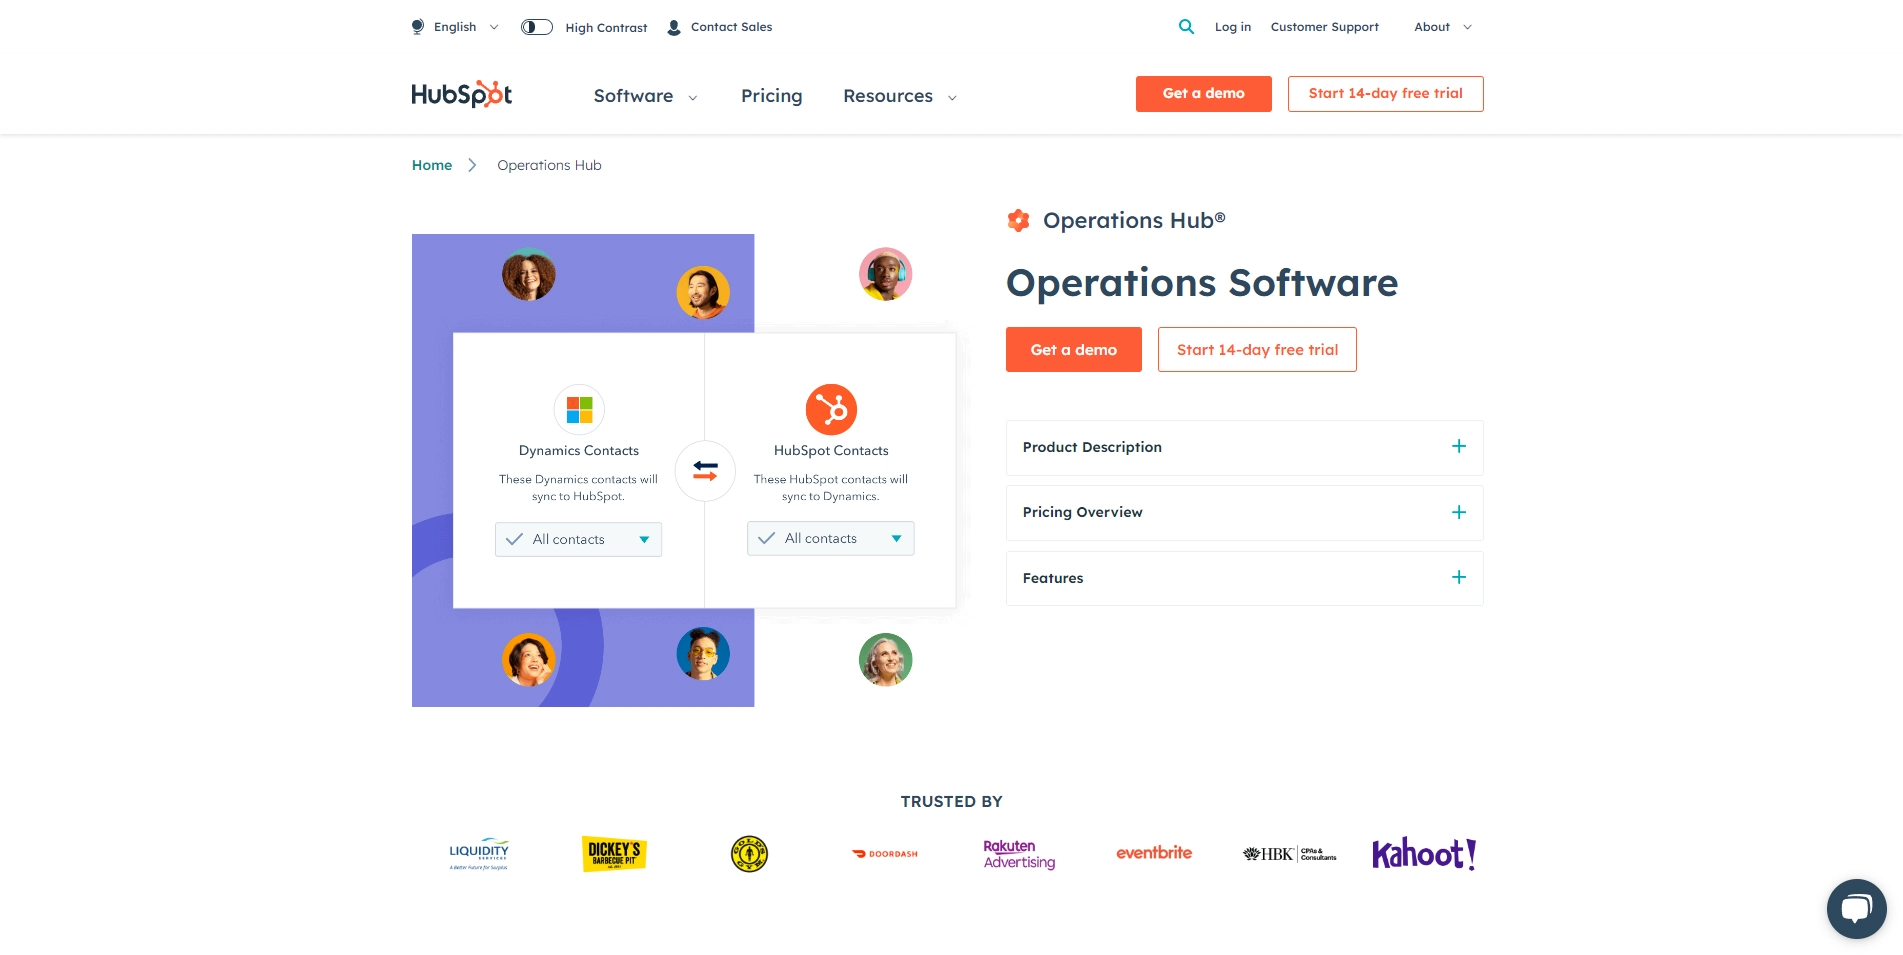 HubSpot operations landing page.